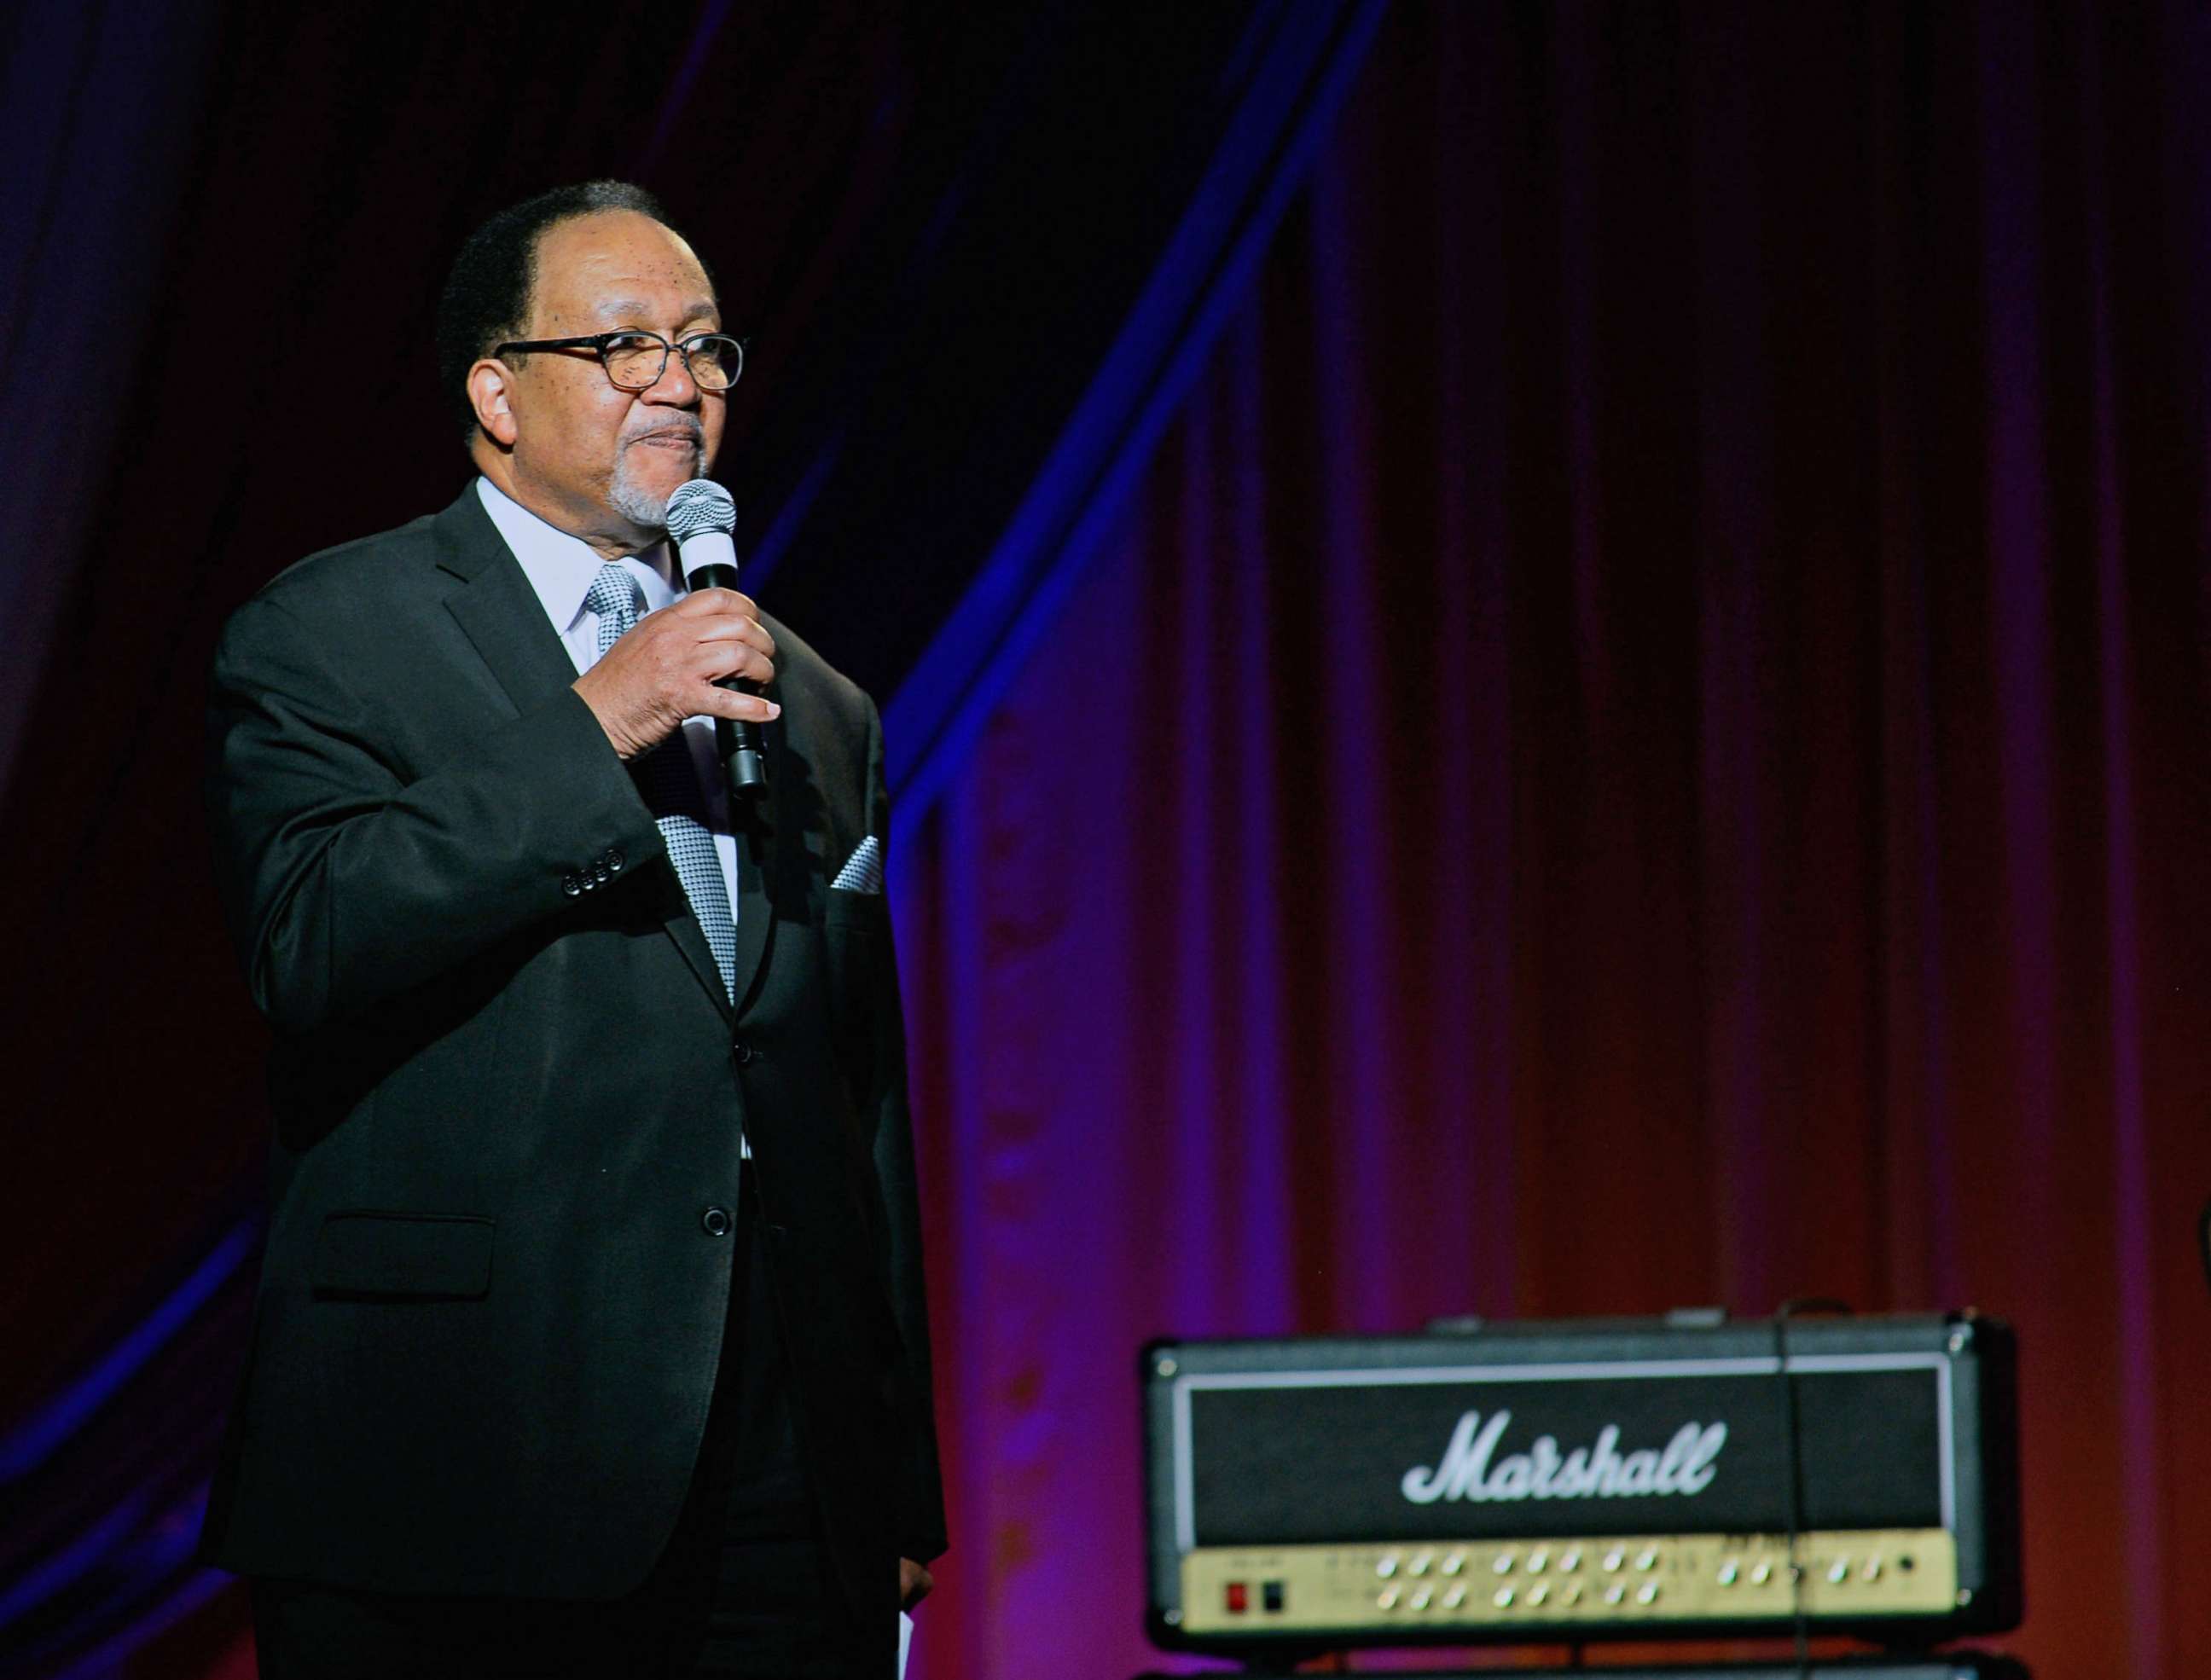 PHOTO: Dr. Benjamin Chavis speaks during a Diamond Empowerment Fund event at the Four Seasons Hotel Las Vegas  on May 28, 2015, in Las Vegas.